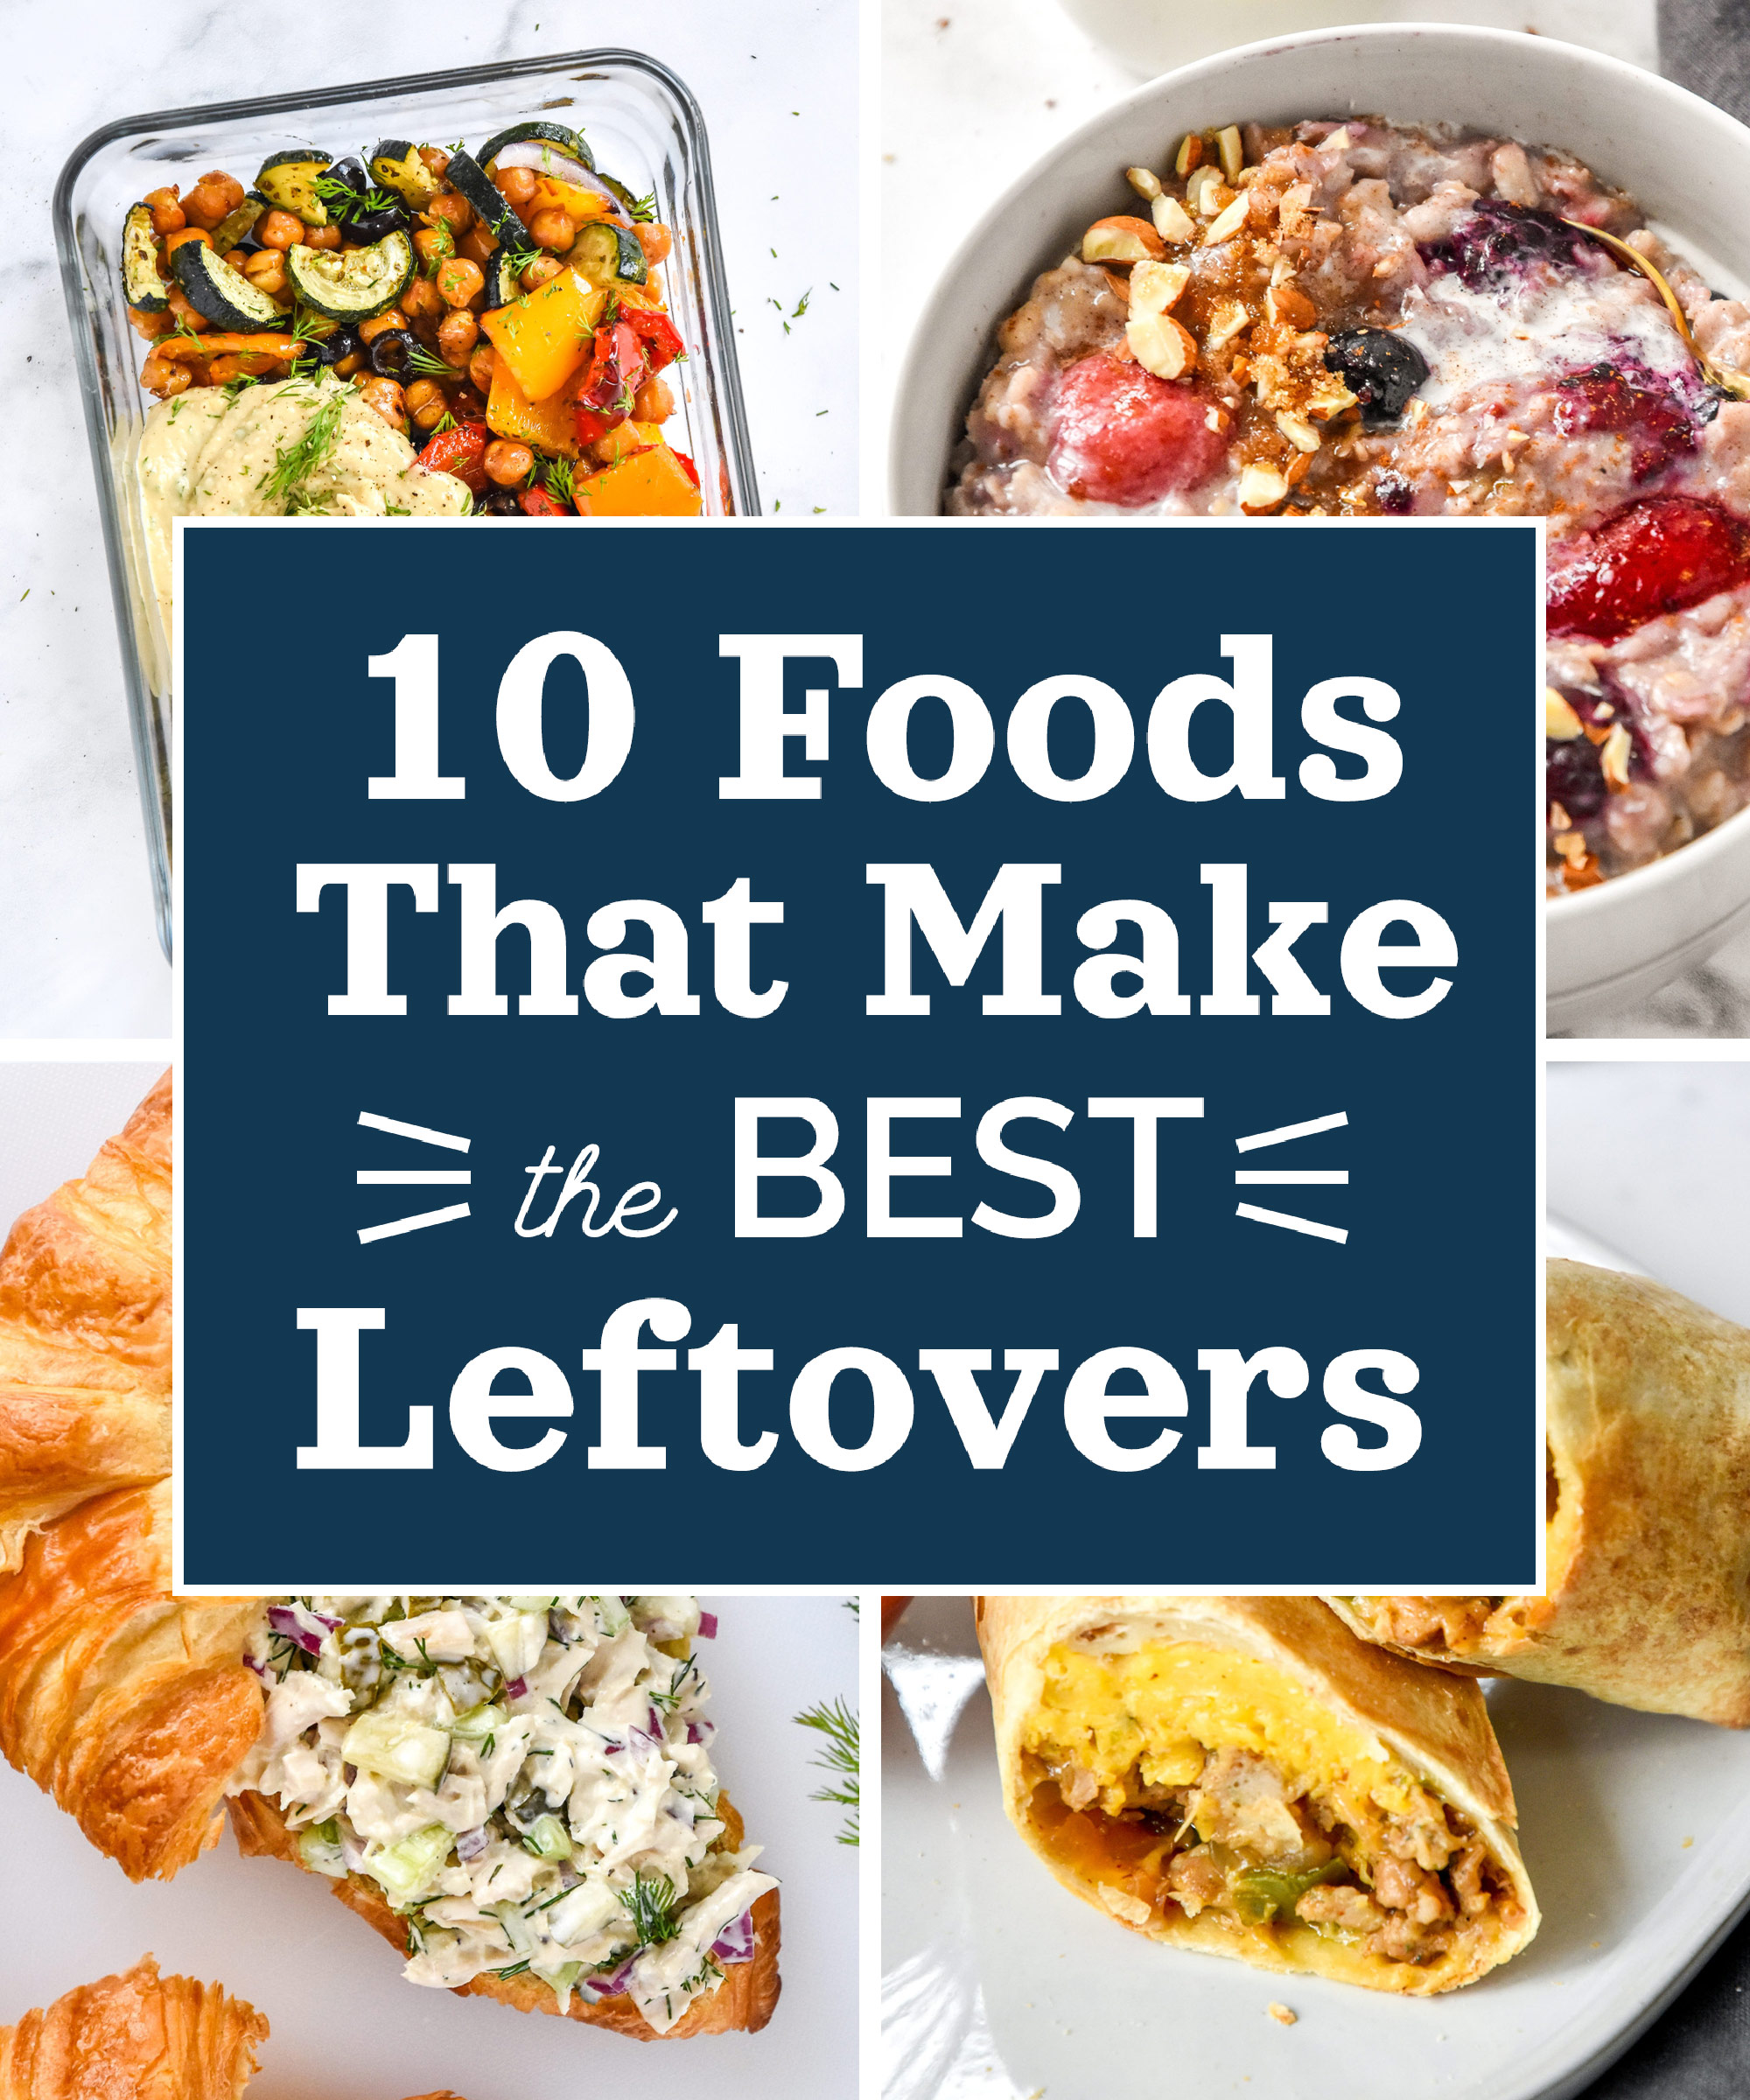 10 Dinner Leftovers That Make Great Packed Lunches